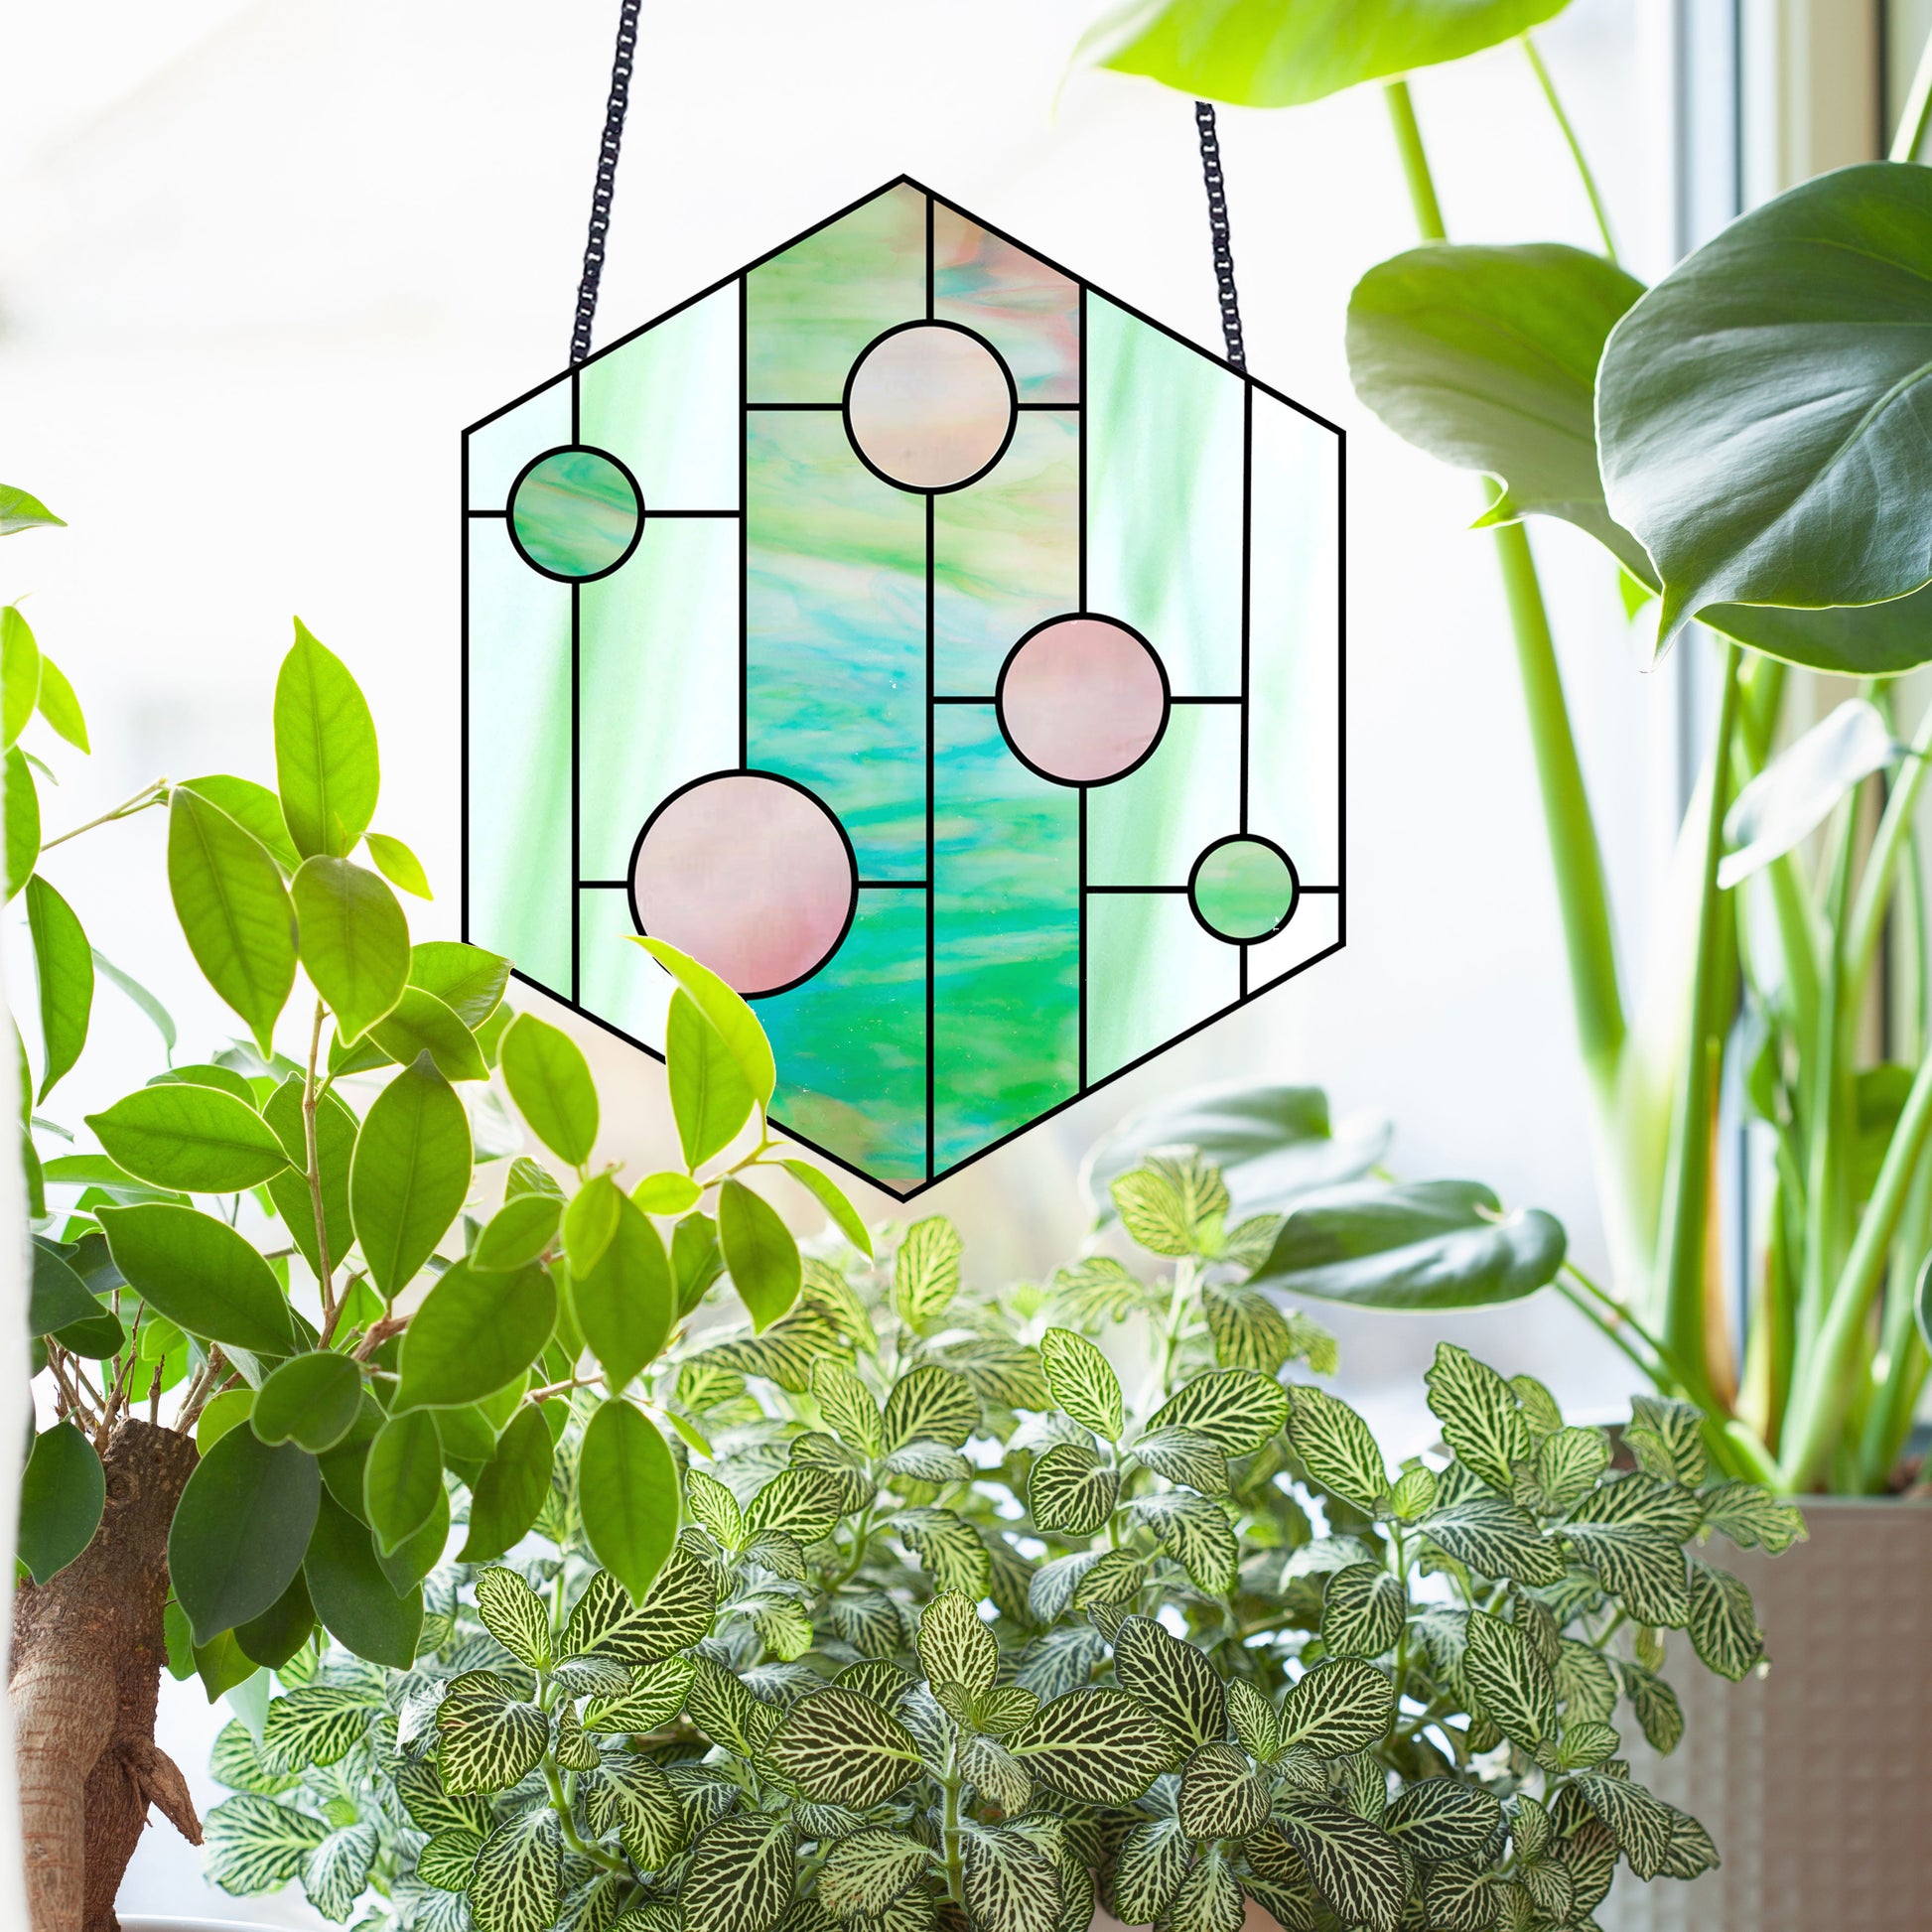 Hexagon geometric stained glass pattern, instant pdf download, shown in window with plants